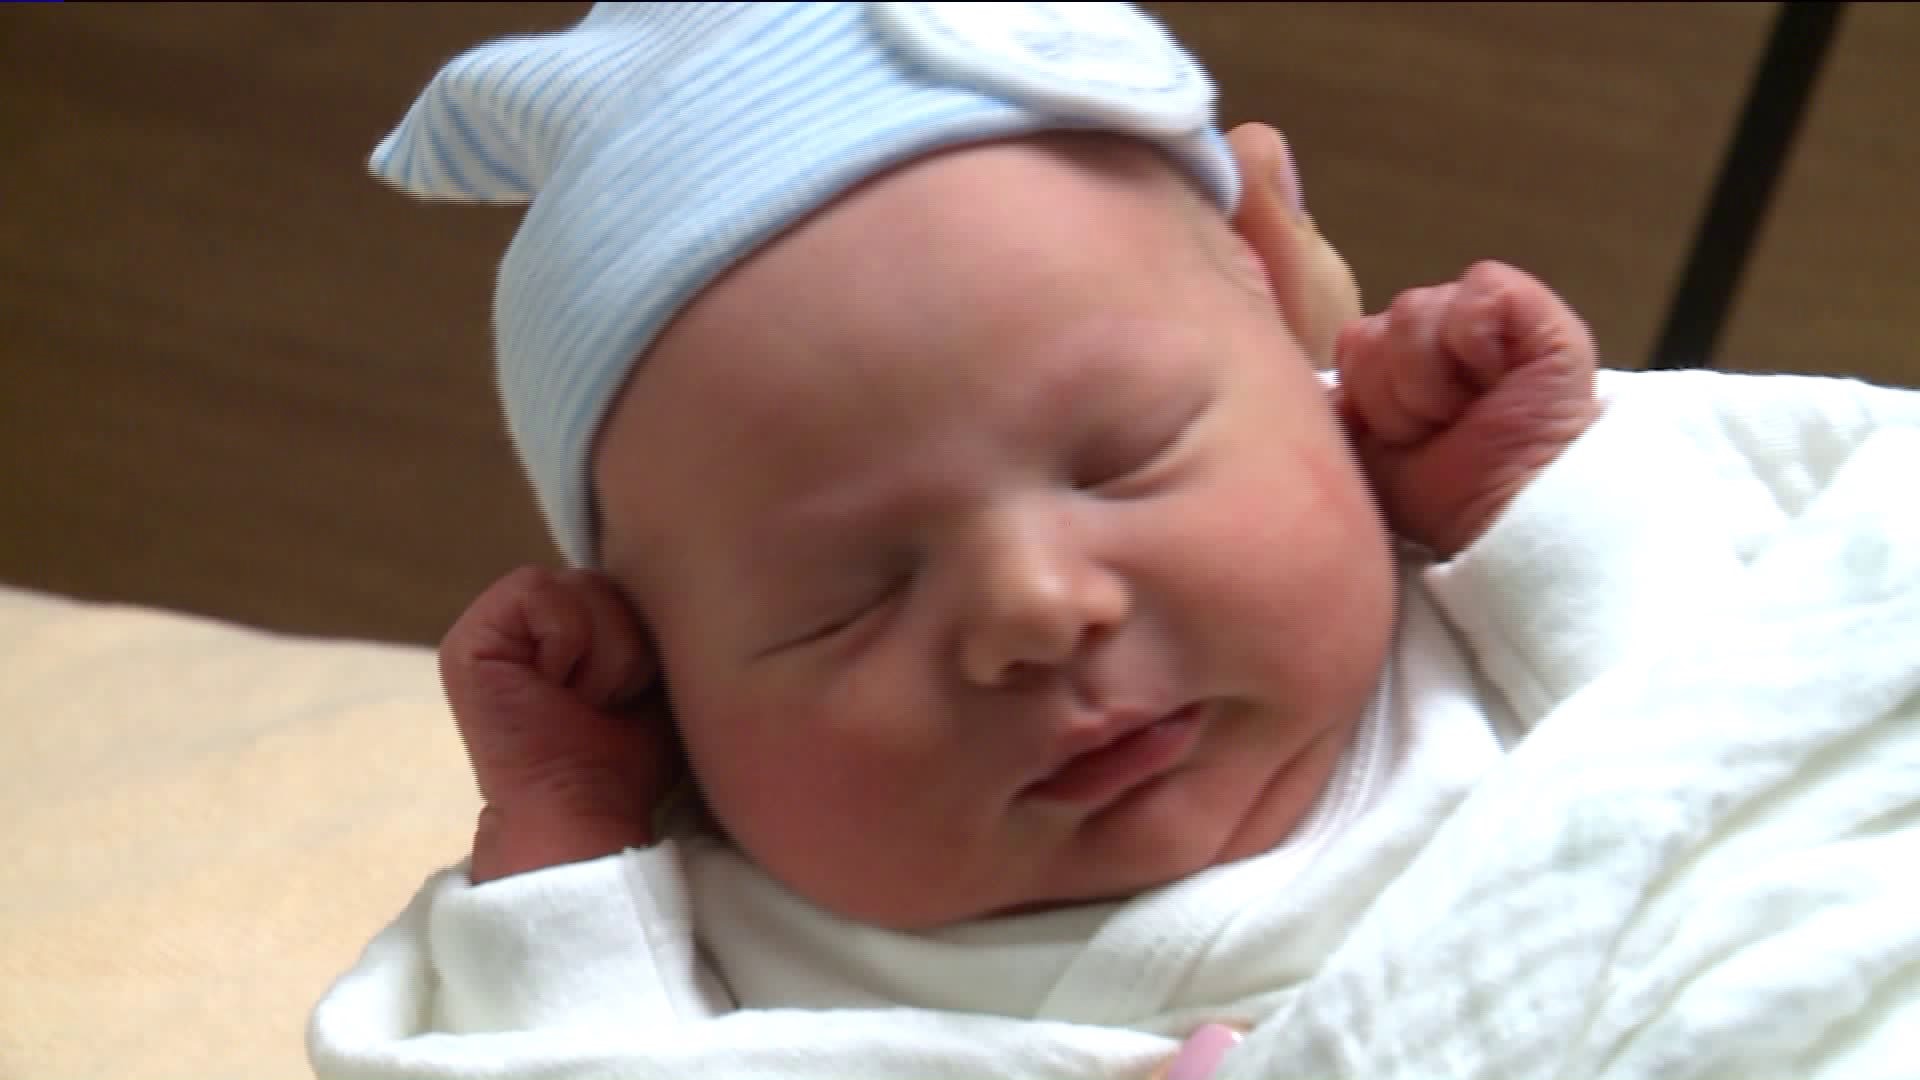 Family gives birth to child during storm